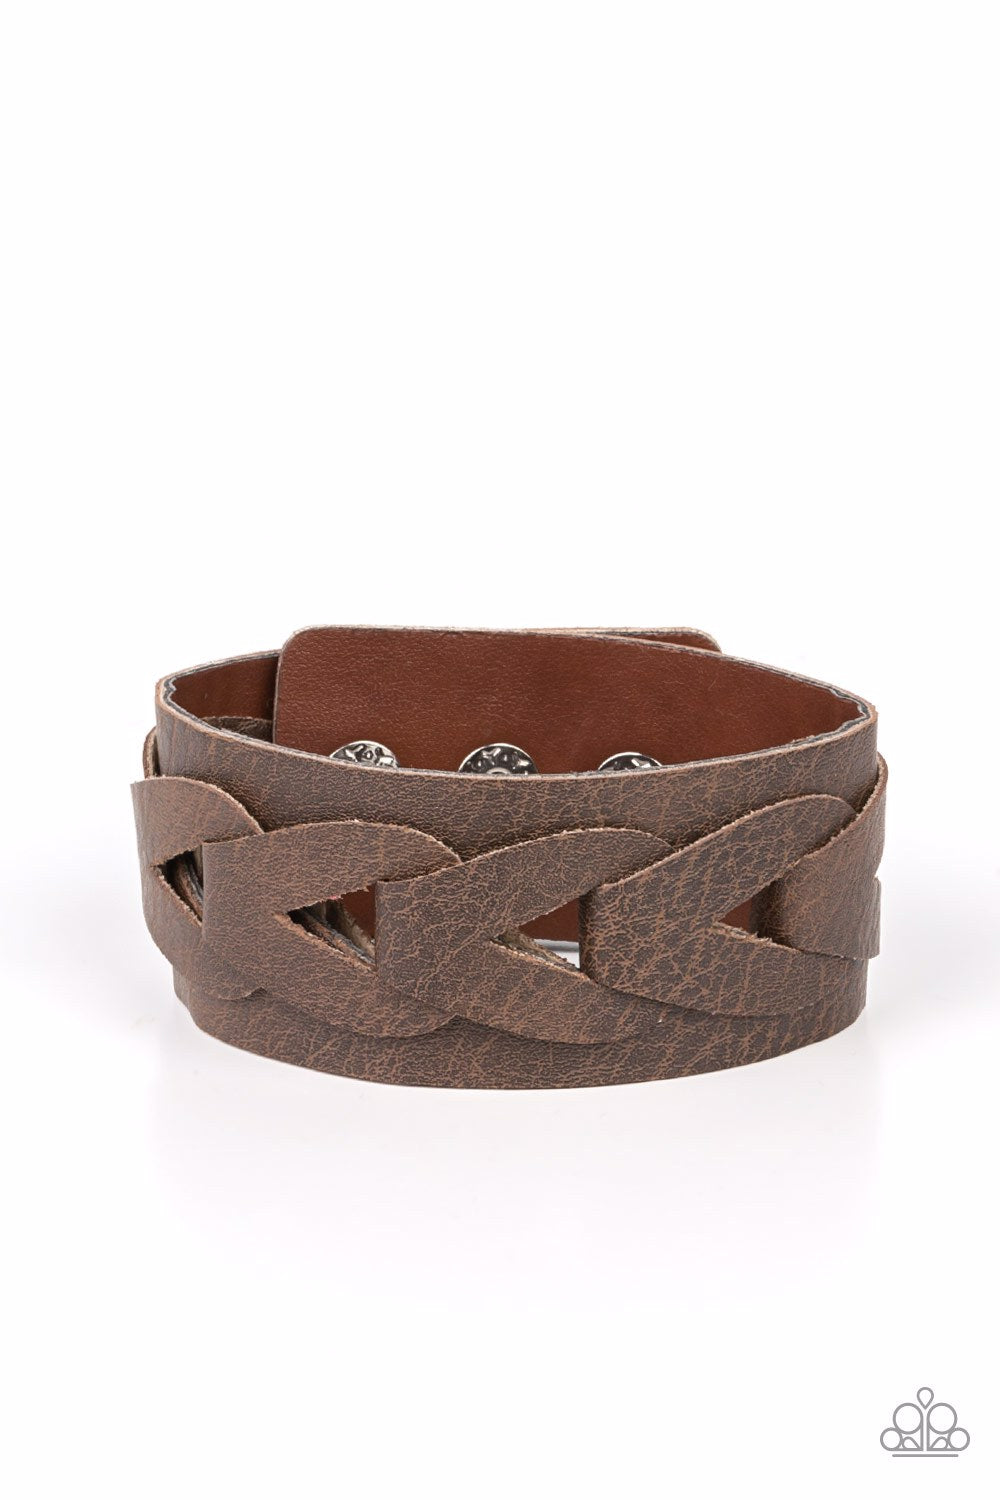 Horse and Carriage - Brown Urban Bracelet